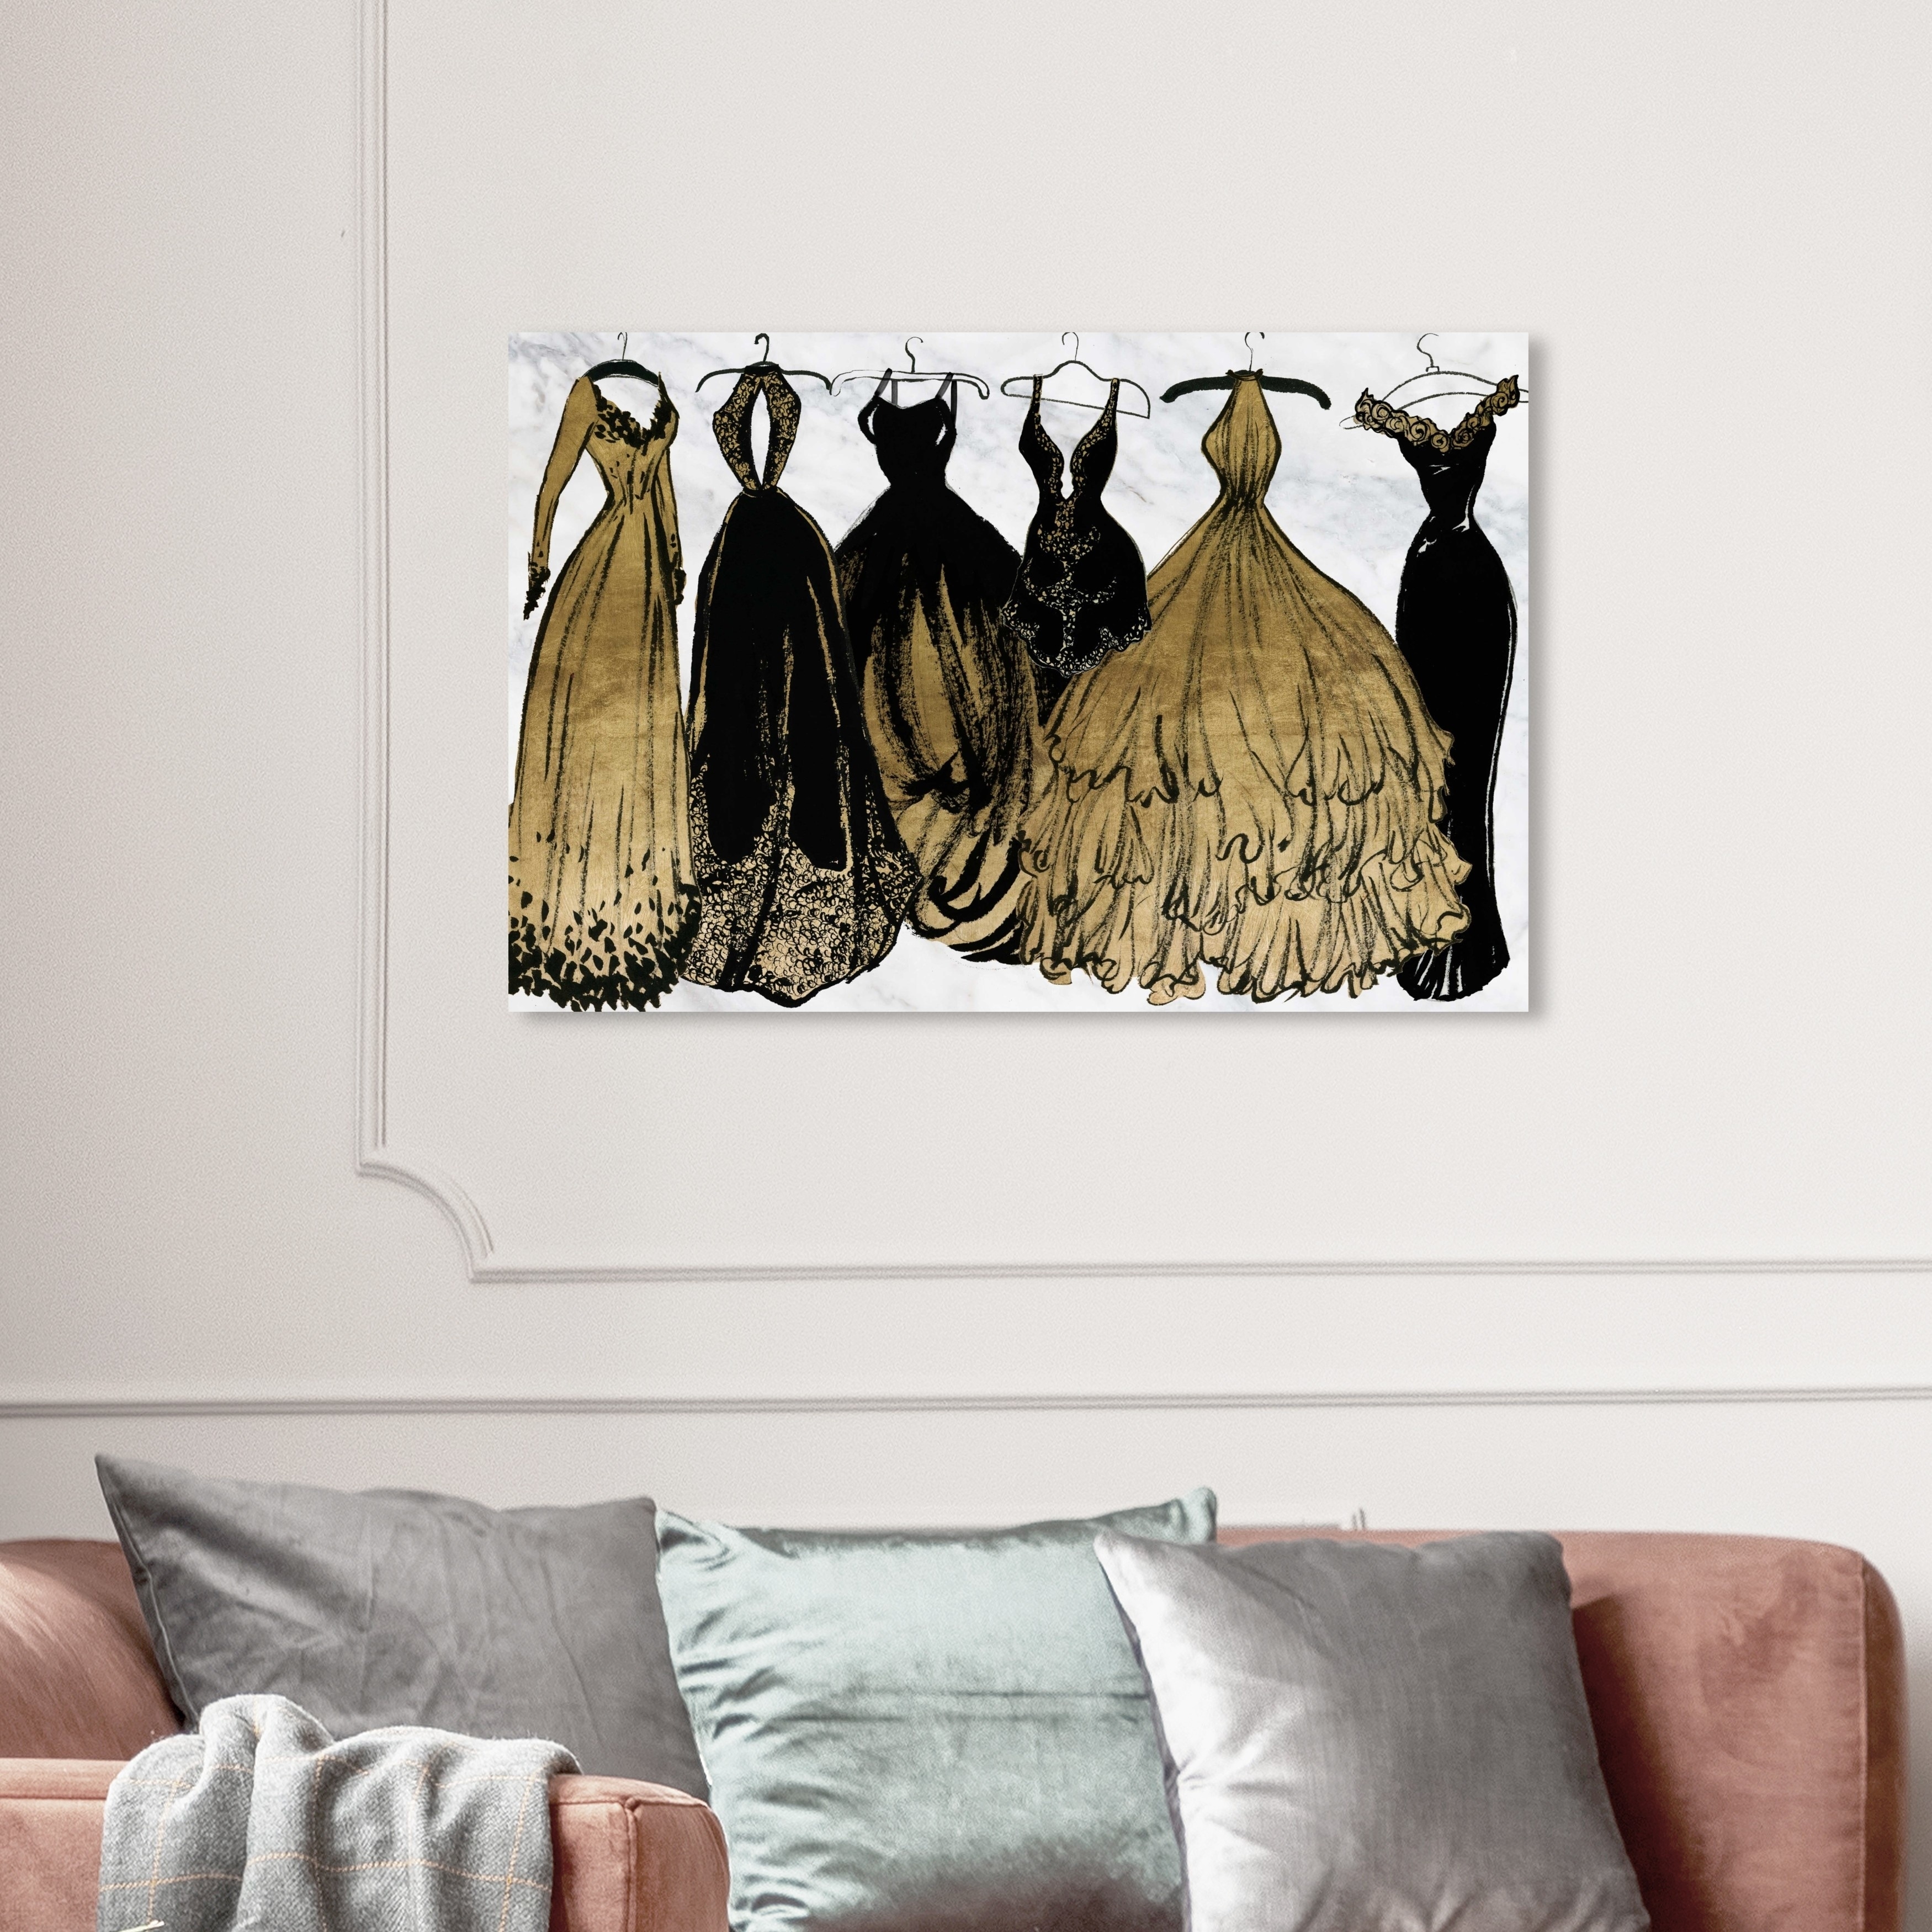 Oliver Gal 'Articles de Voyage Gold' Fashion and Glam Wall Art Canvas Print  - Gold, Black - Bed Bath & Beyond - 28584921